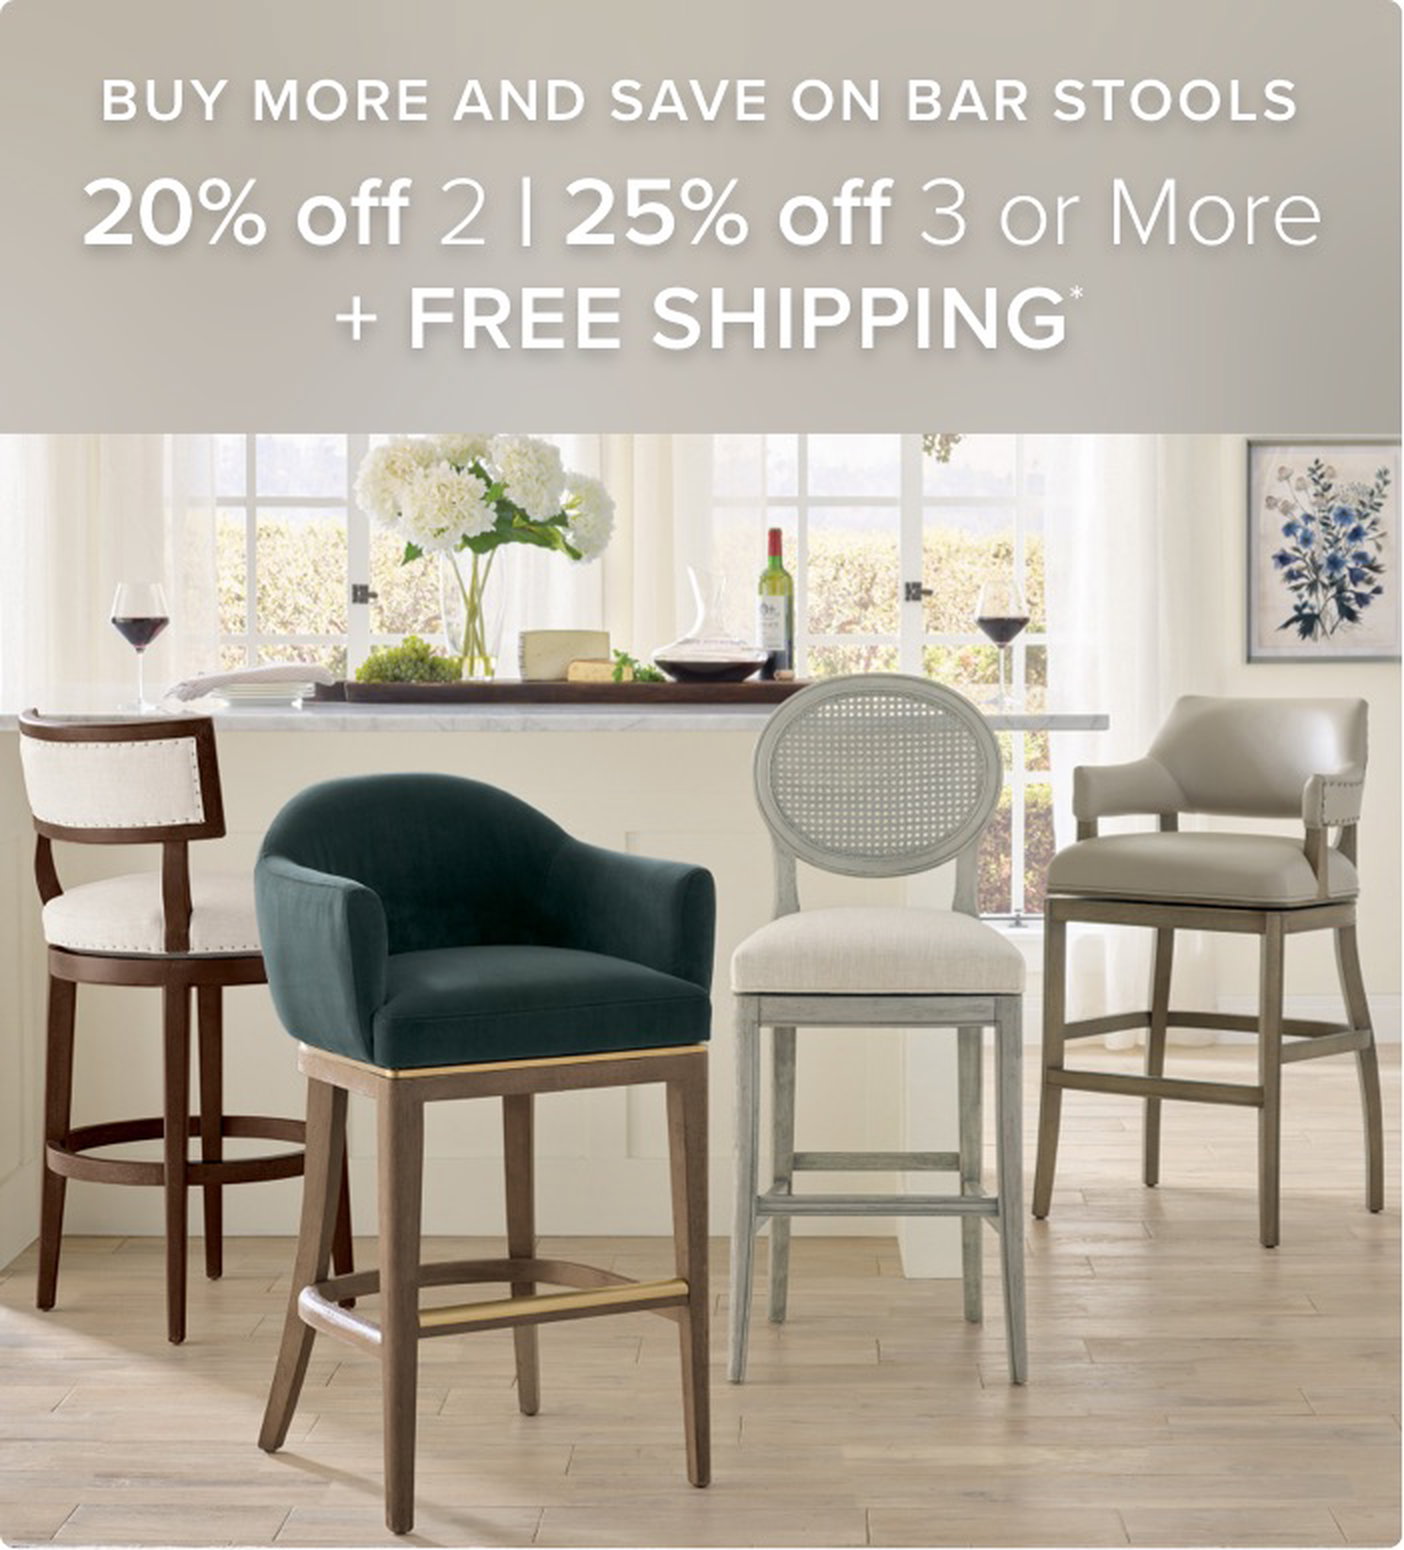 Buy more and save on bar stools 20% off two 25% off three or more*